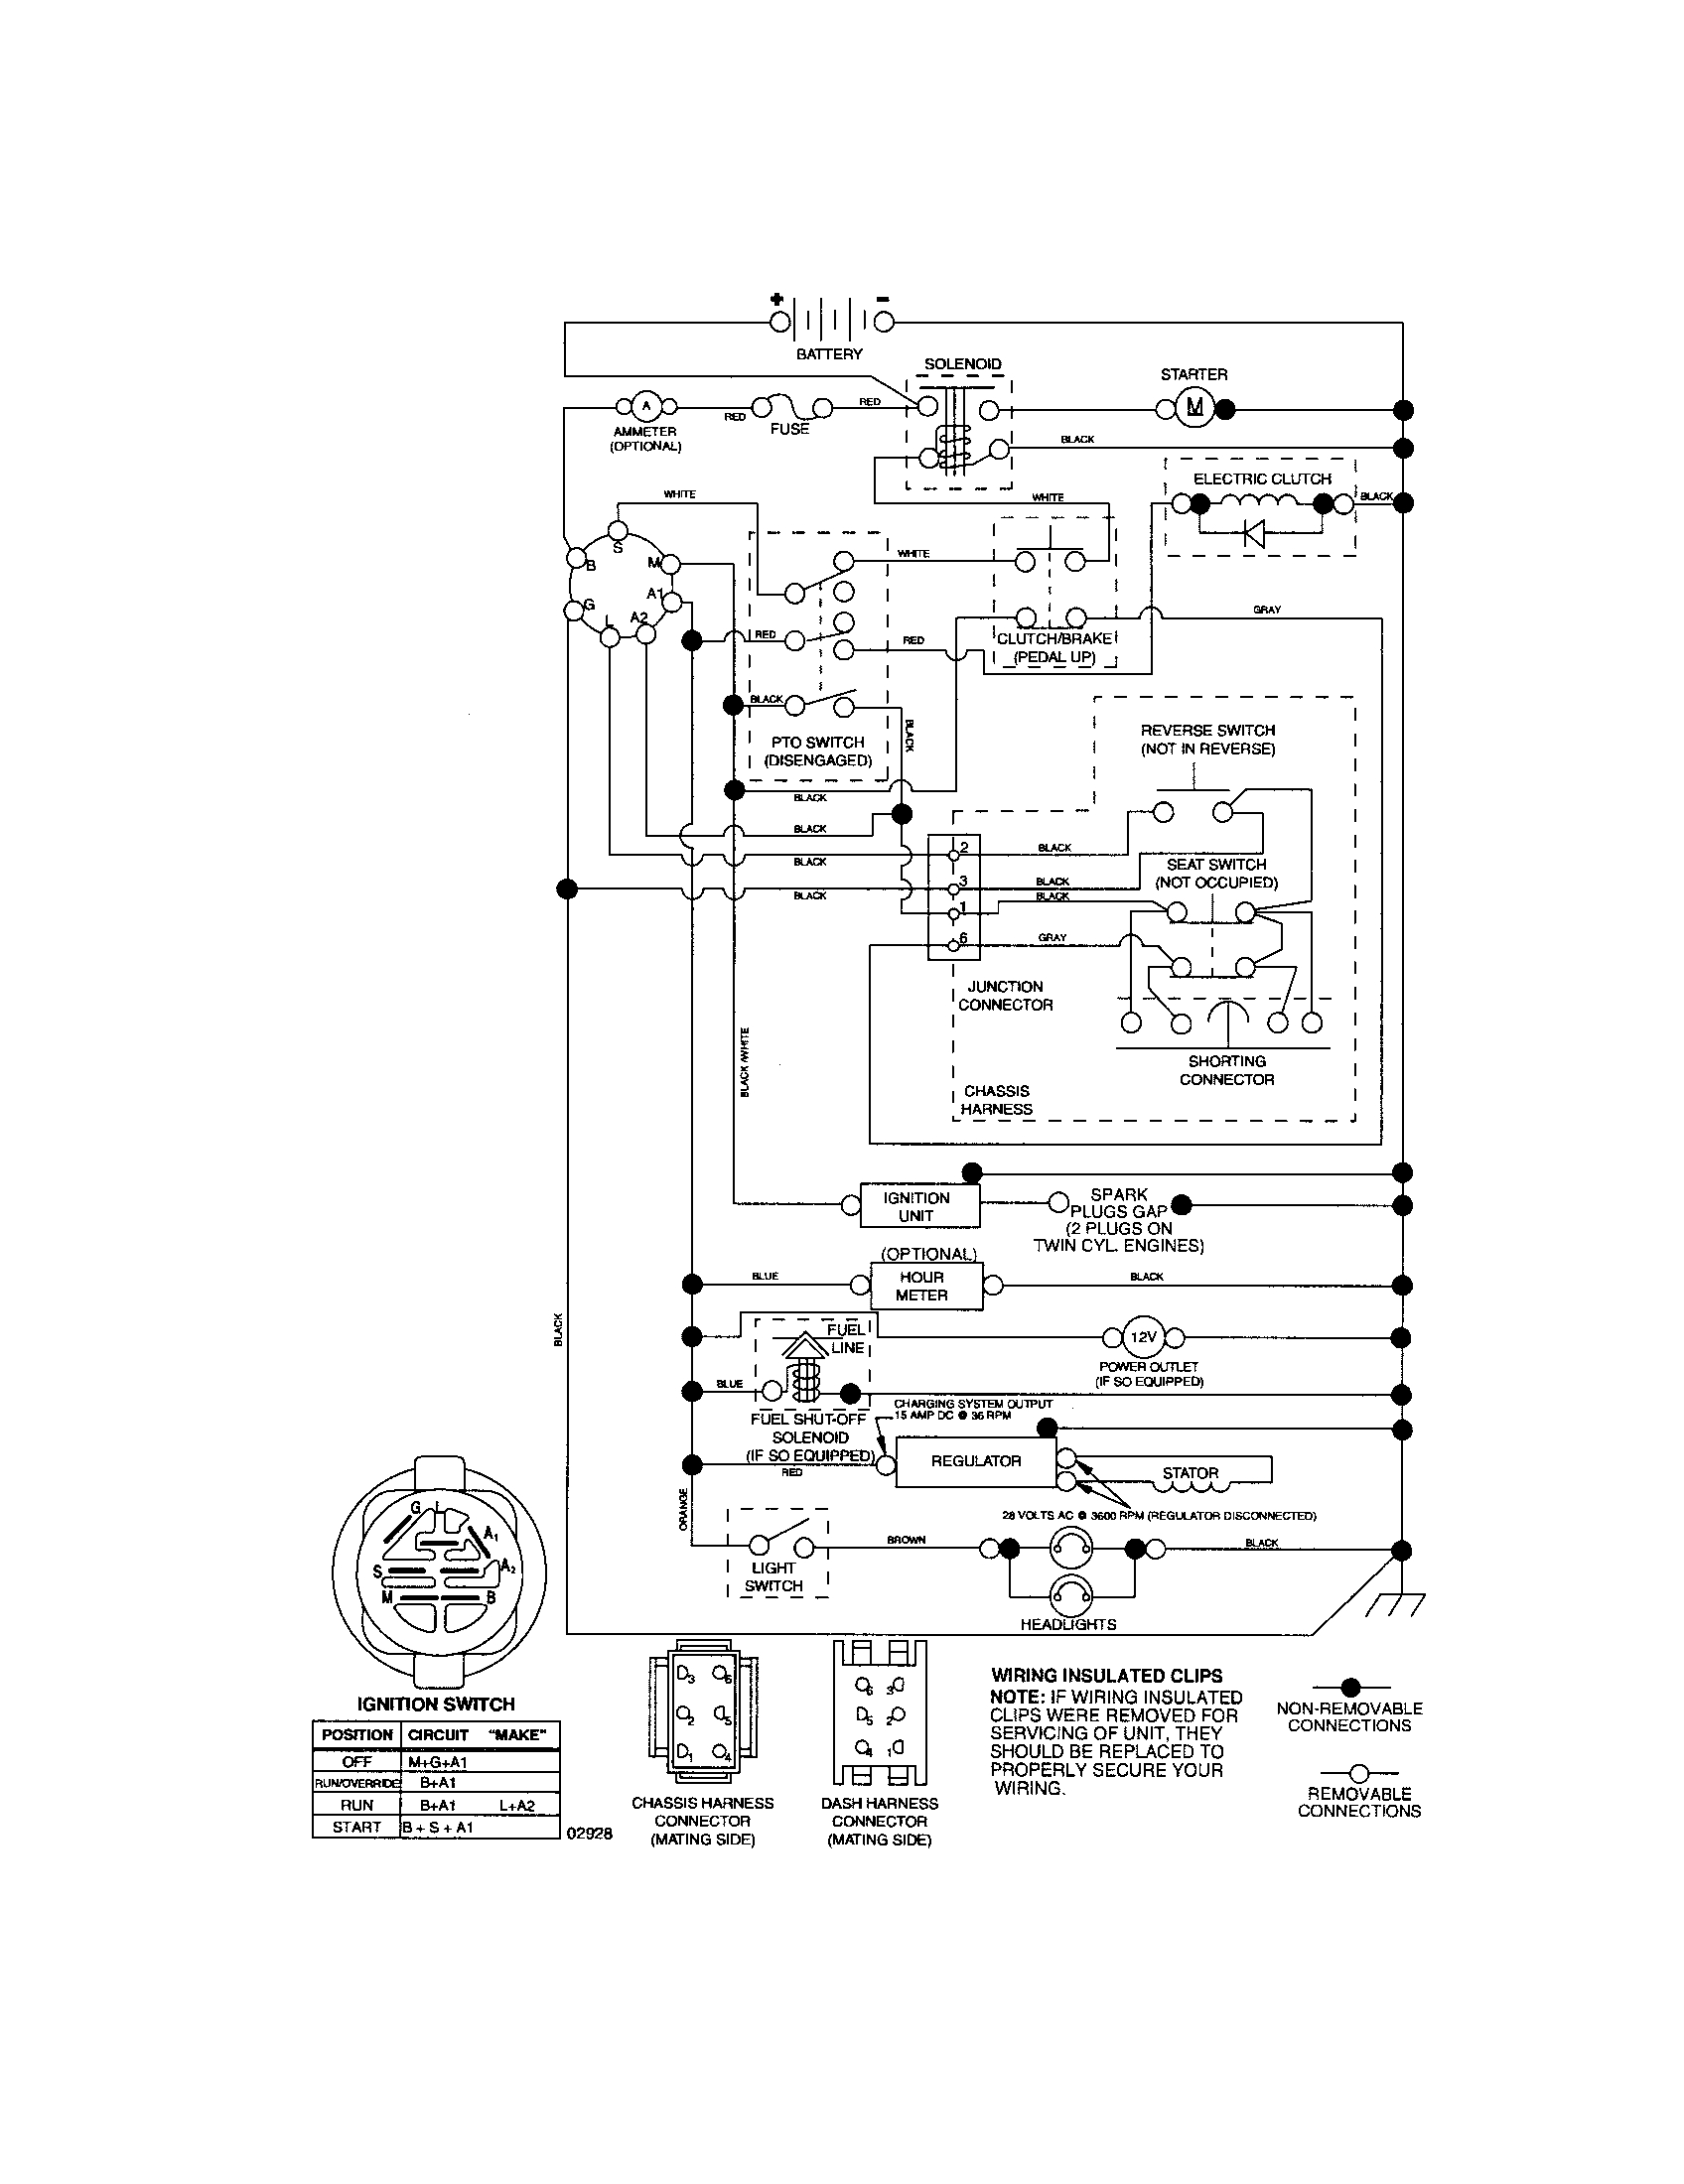 Huskee Lawn Mower Parts Diagram Wiring Diagram For A Craftsman Riding Mower Get Free Image About